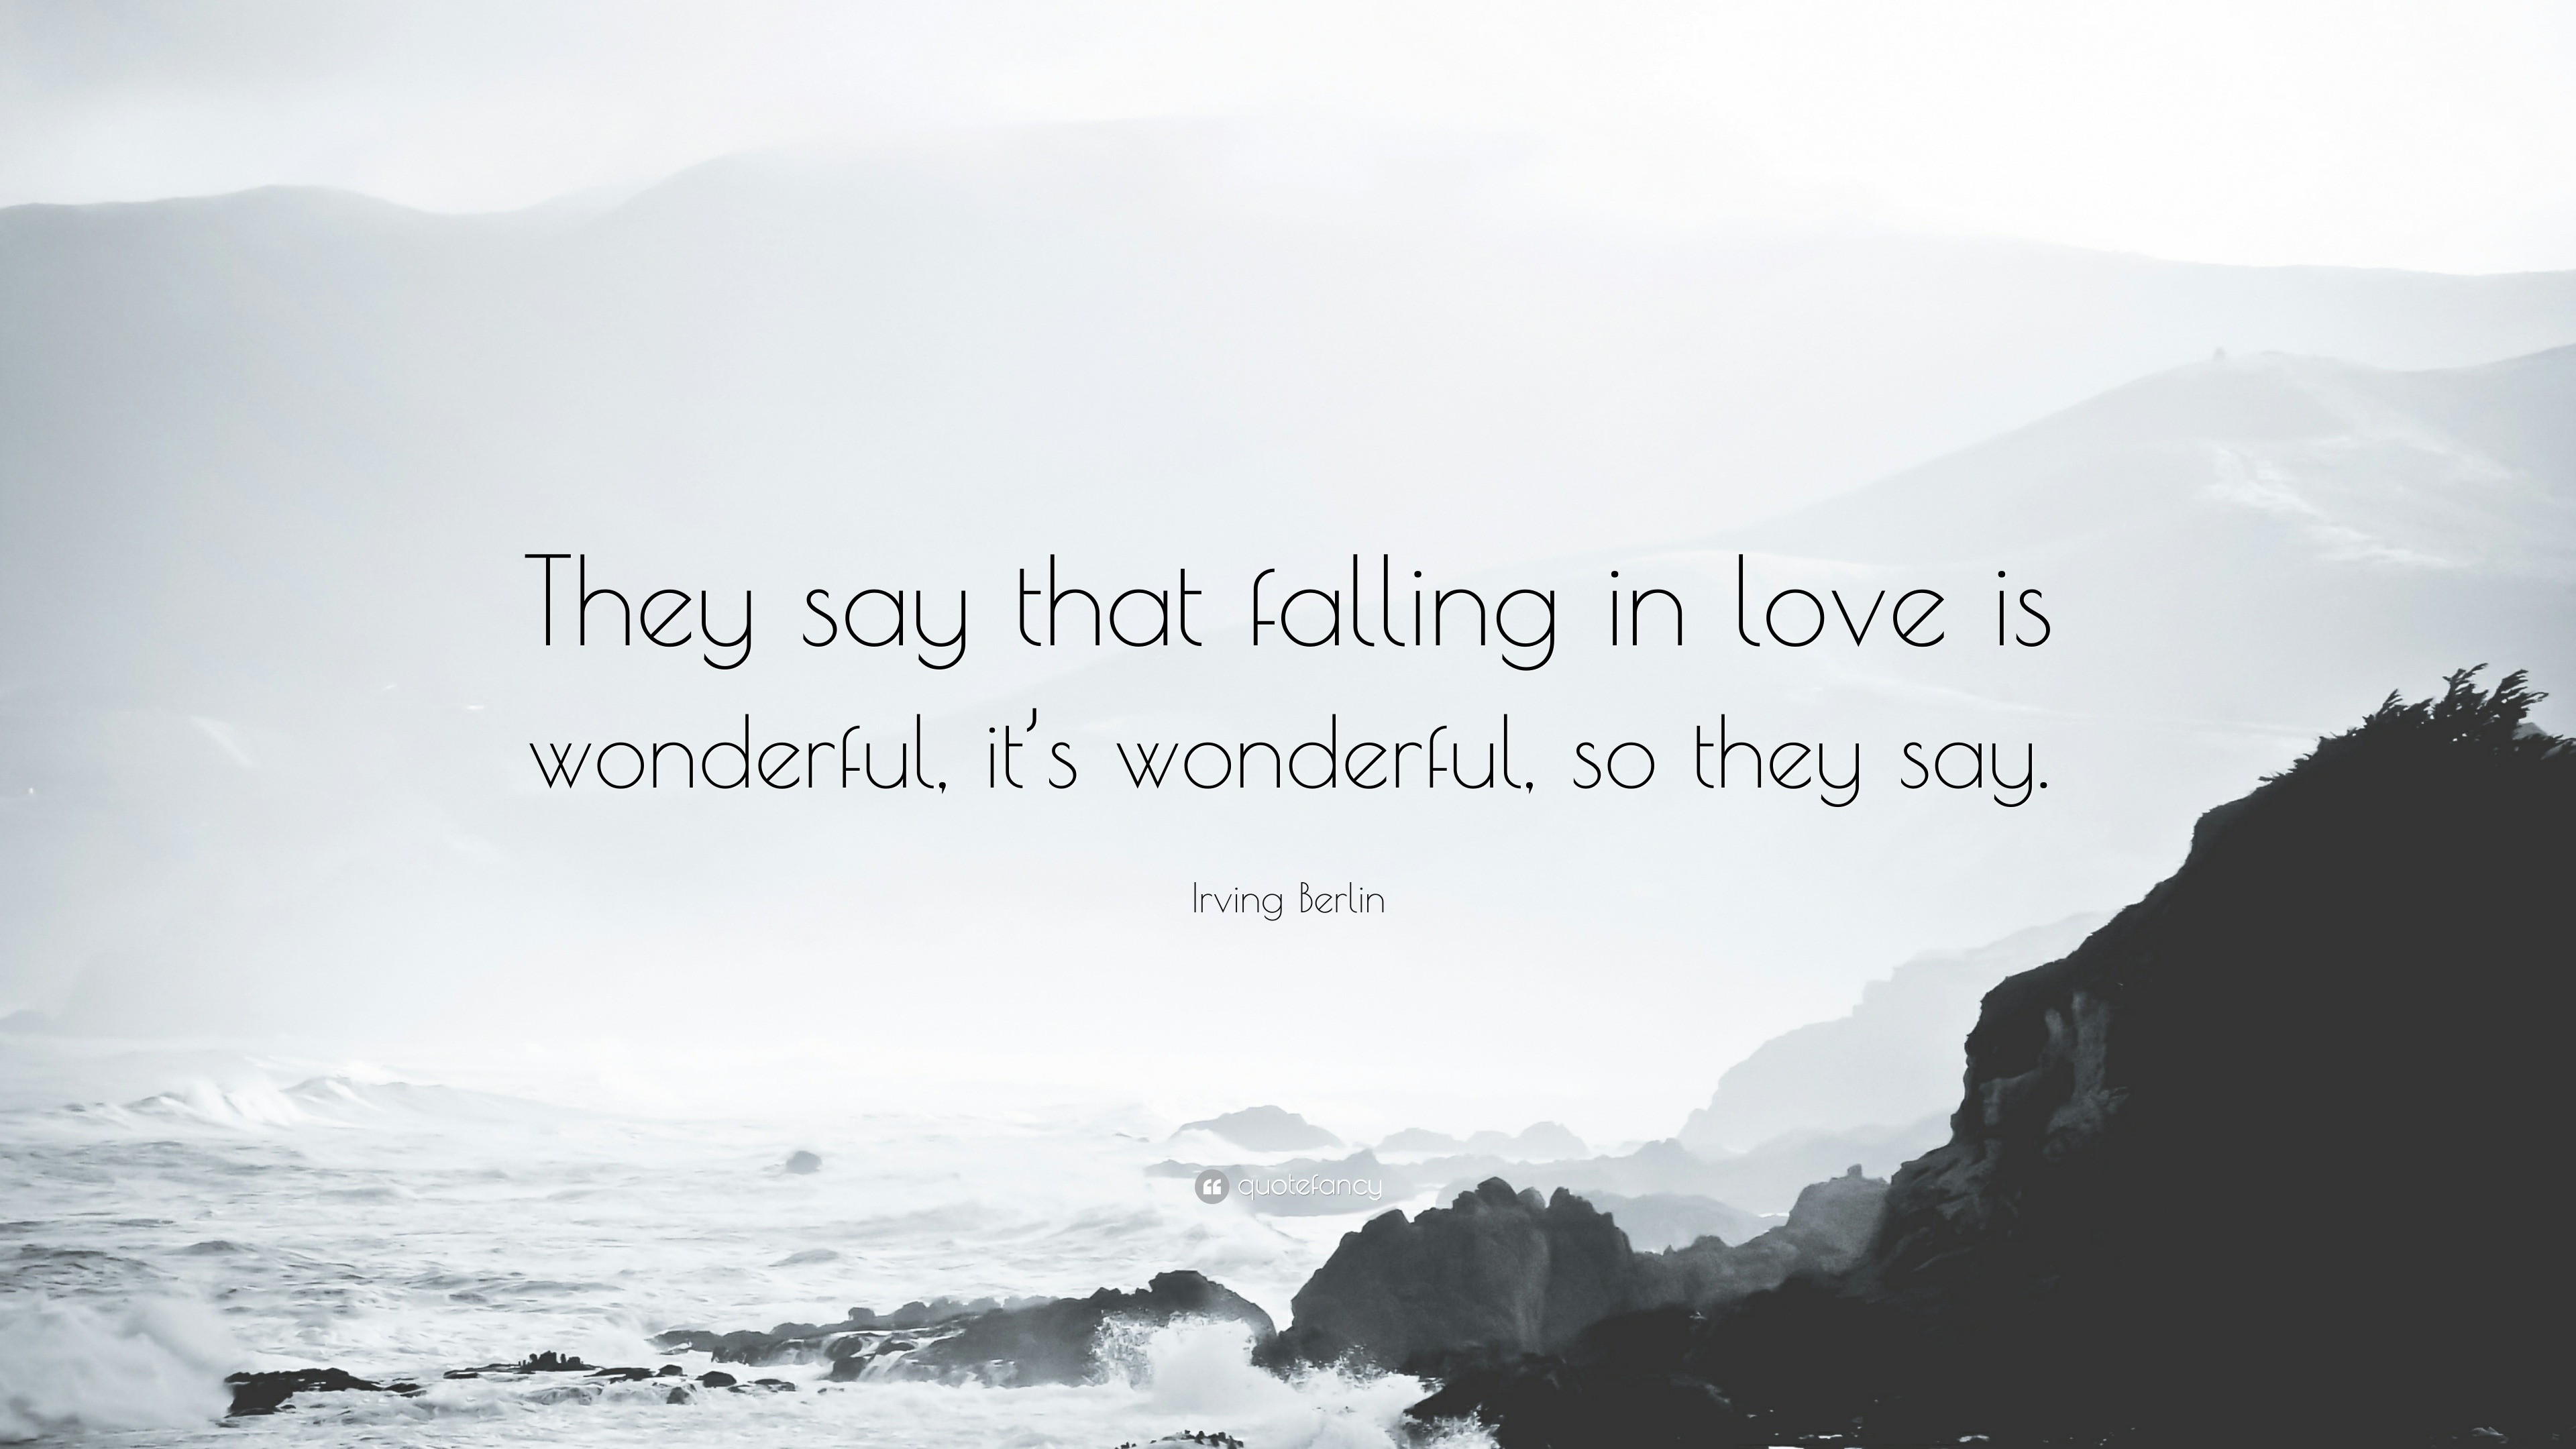 Irving Berlin Quote “They say that falling in love is wonderful it s wonderful